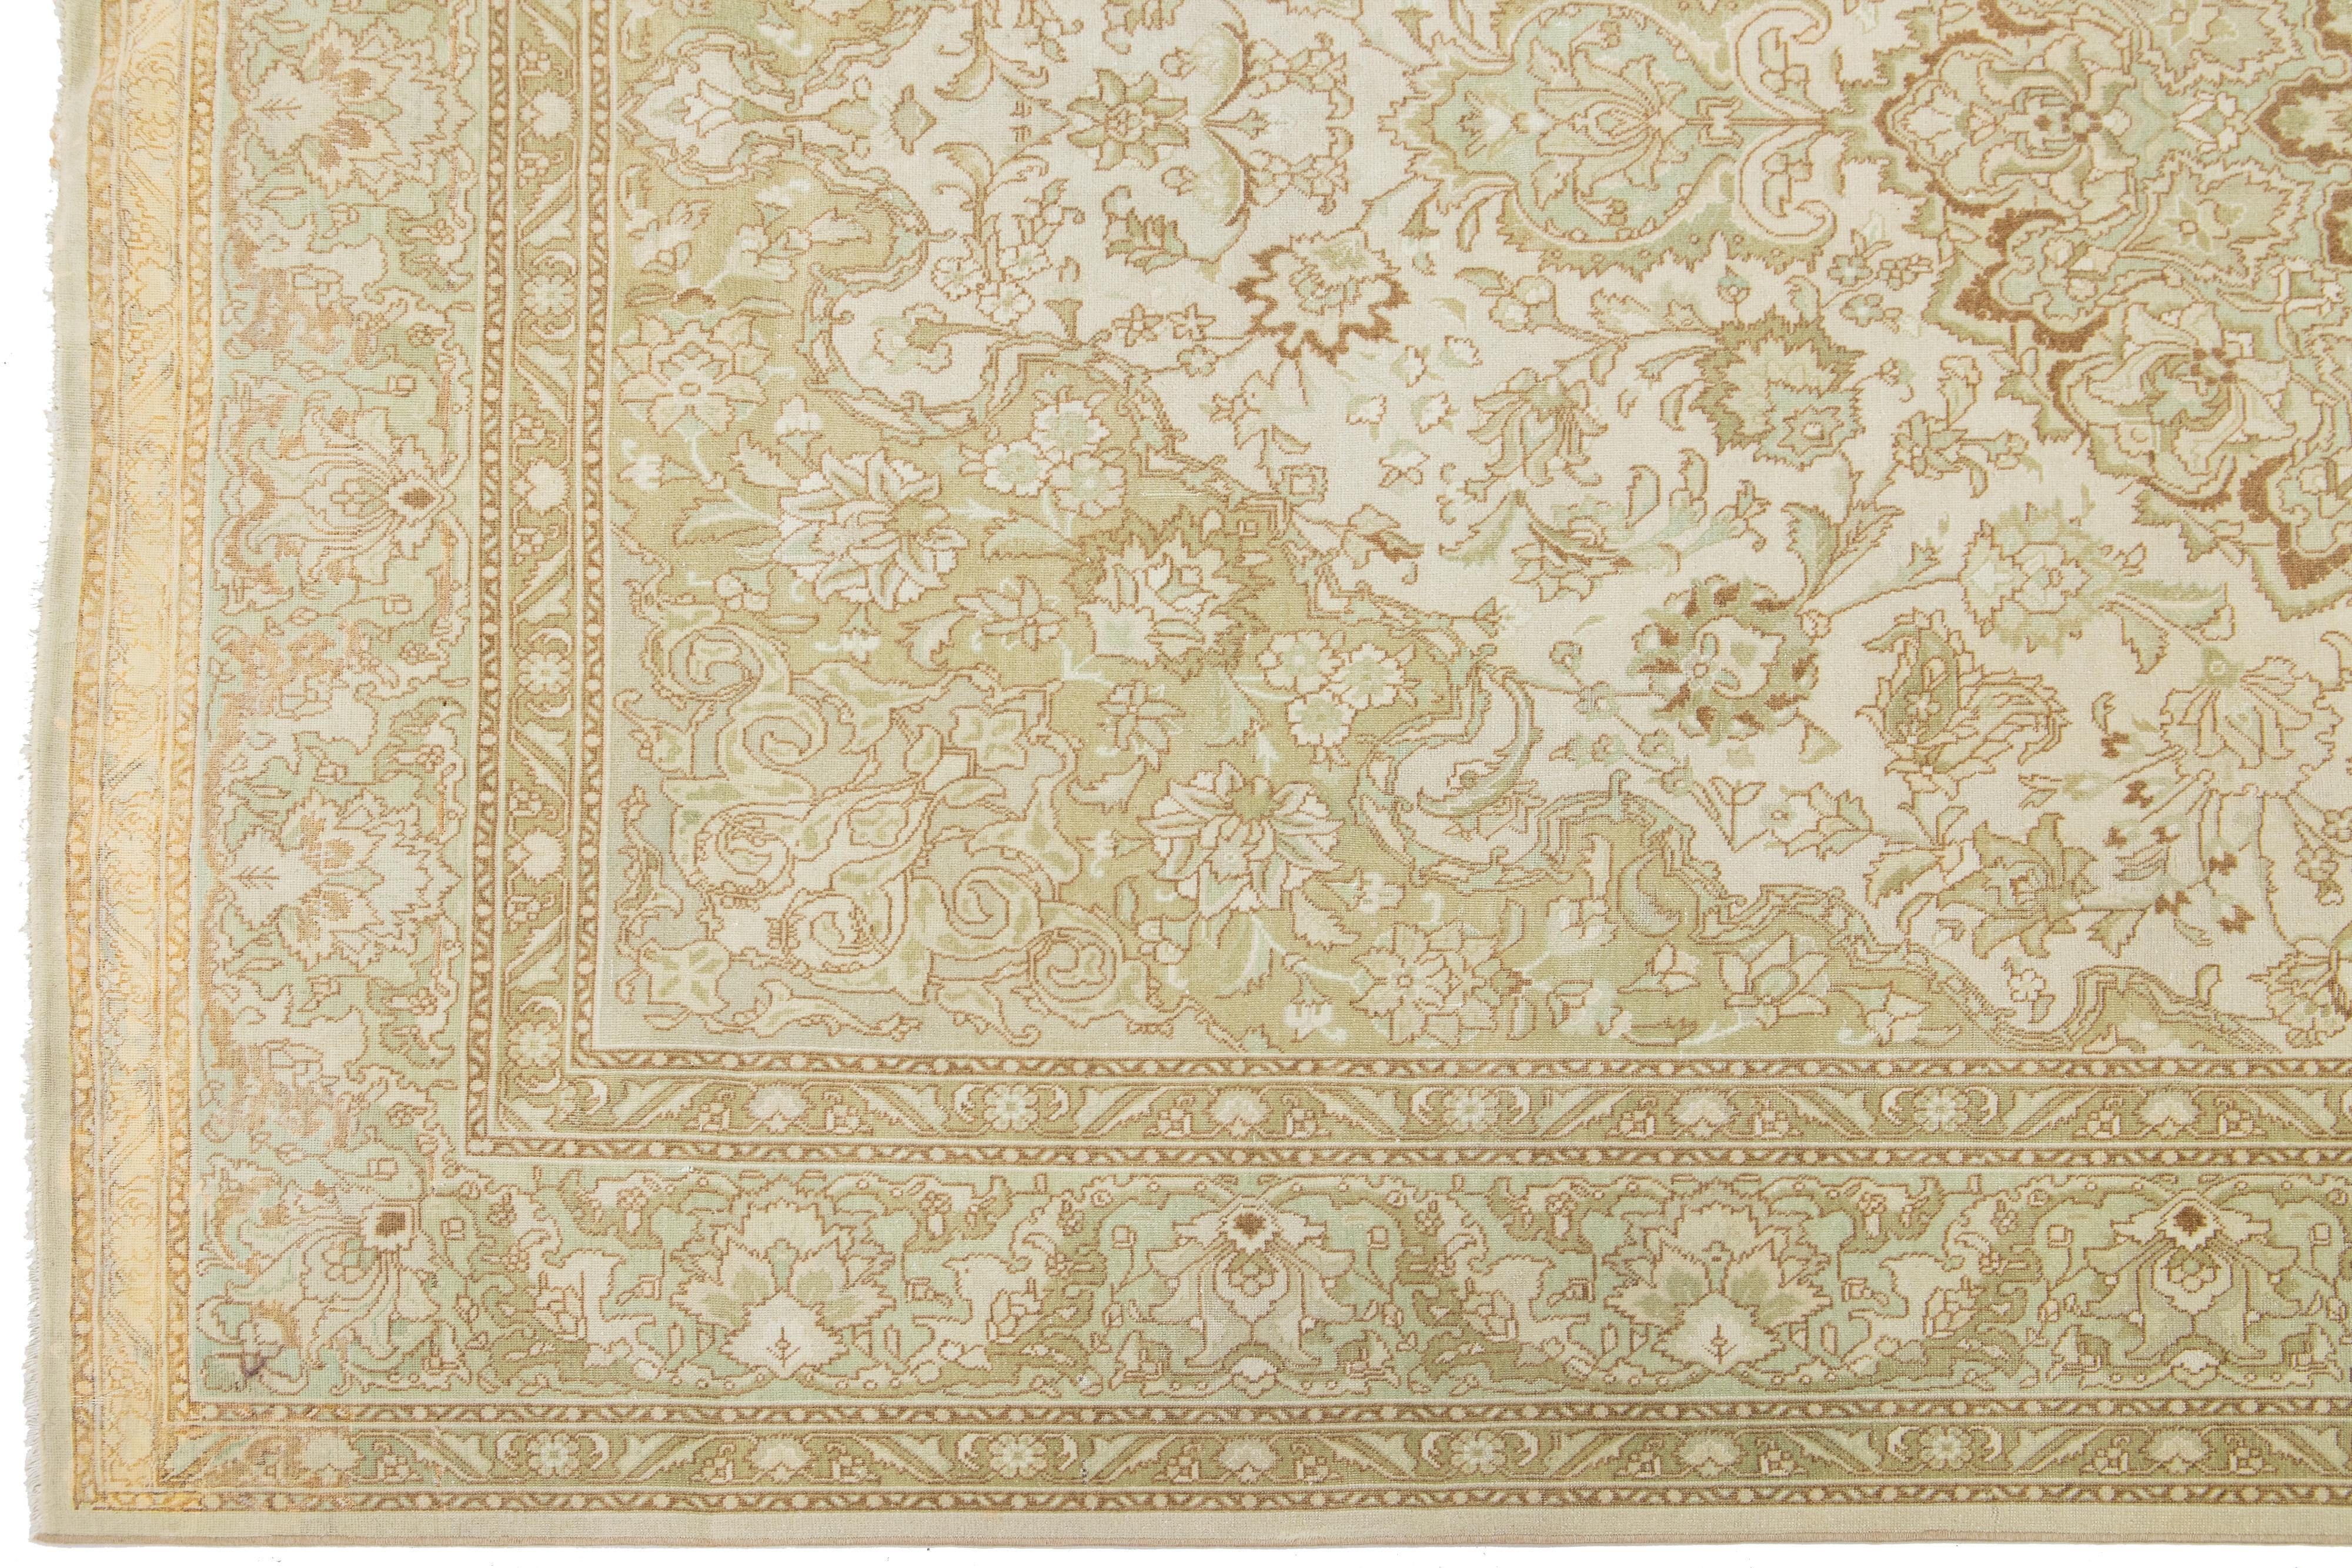 20th Century 1920s Antique Persian Tabriz Wool Rug Allover Floral In Beige Color For Sale